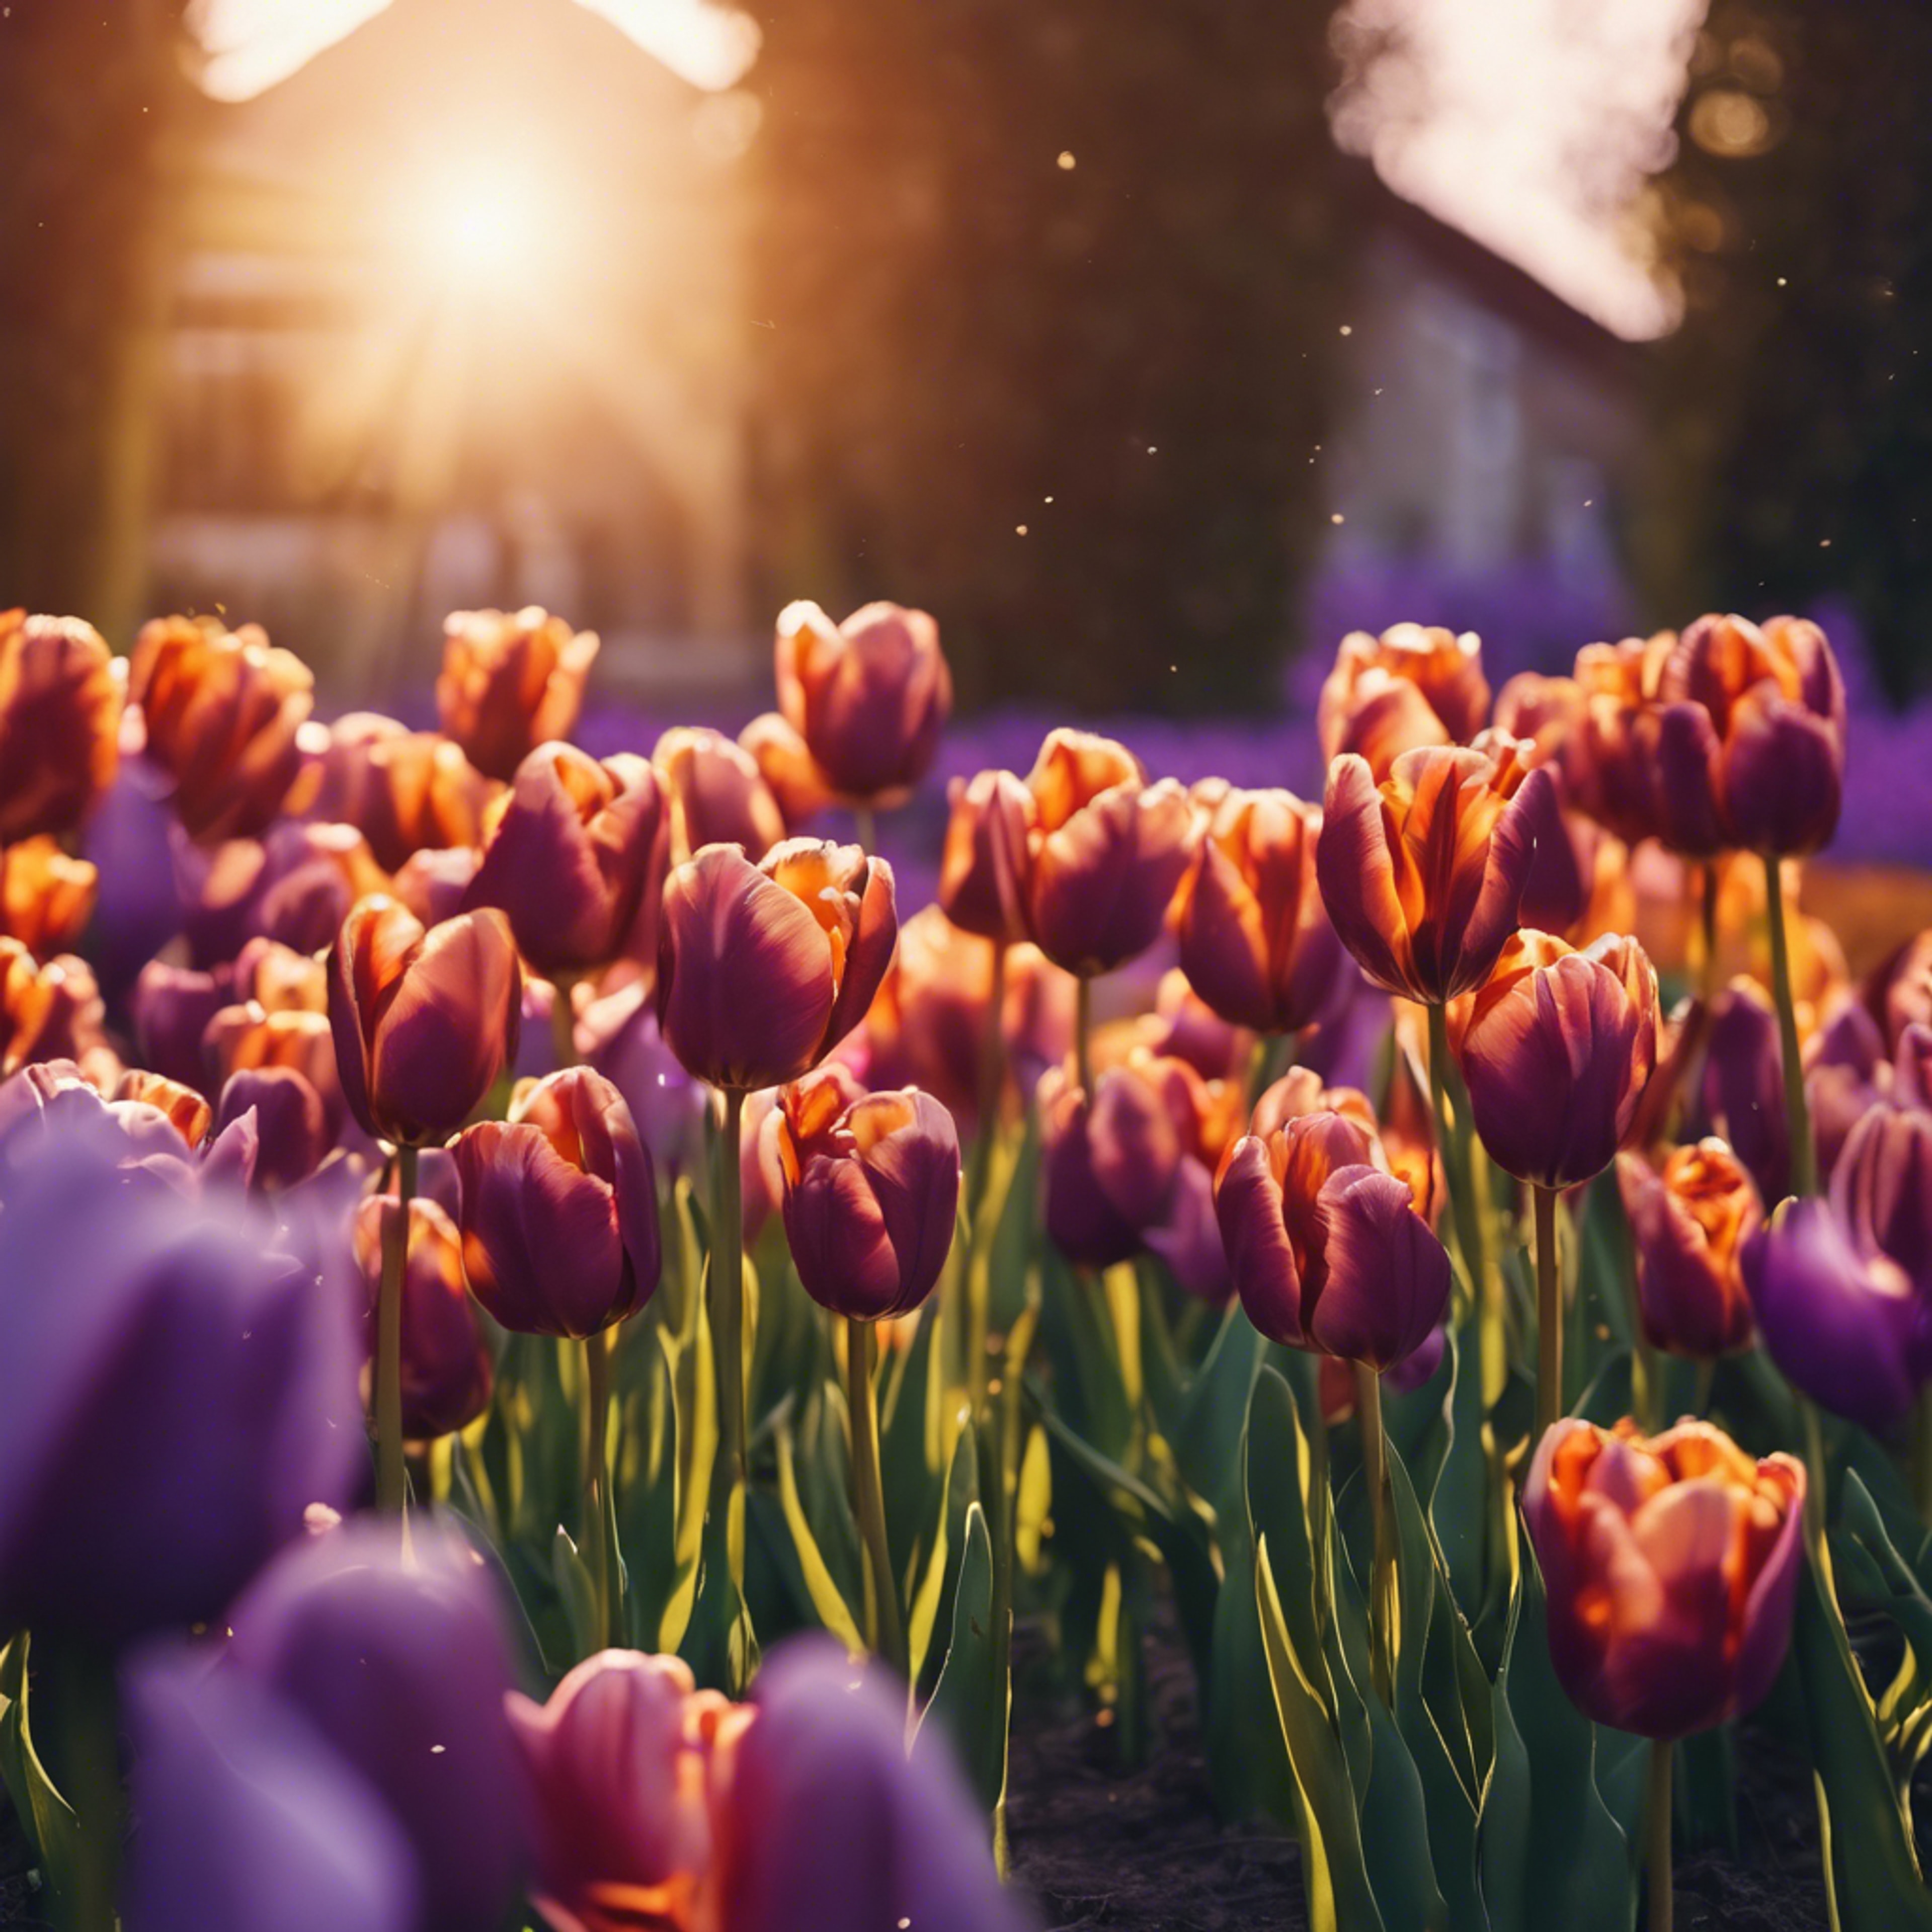 Tulips in a garden, bathed in the purple and orange rays of the setting sun.壁紙[929499f715404d6e96f8]